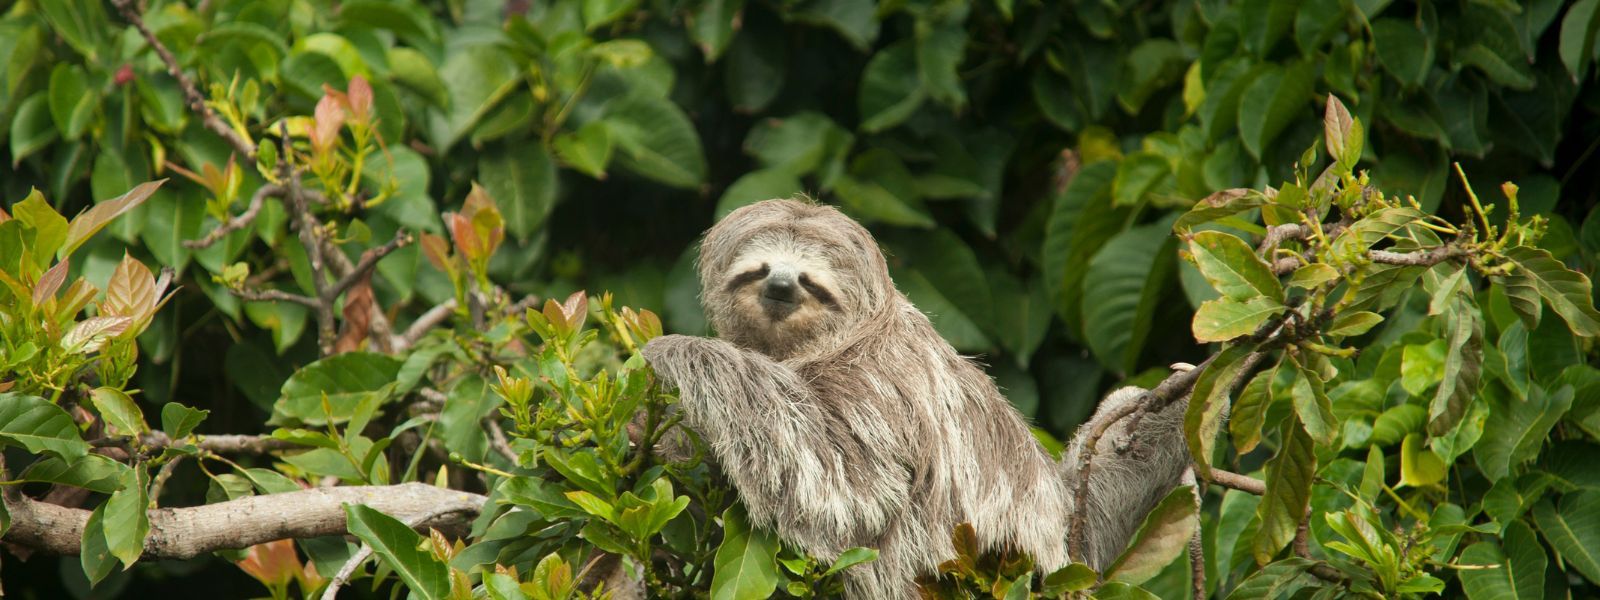 A sloth sitting amongst the trees smiling in Costa Rica